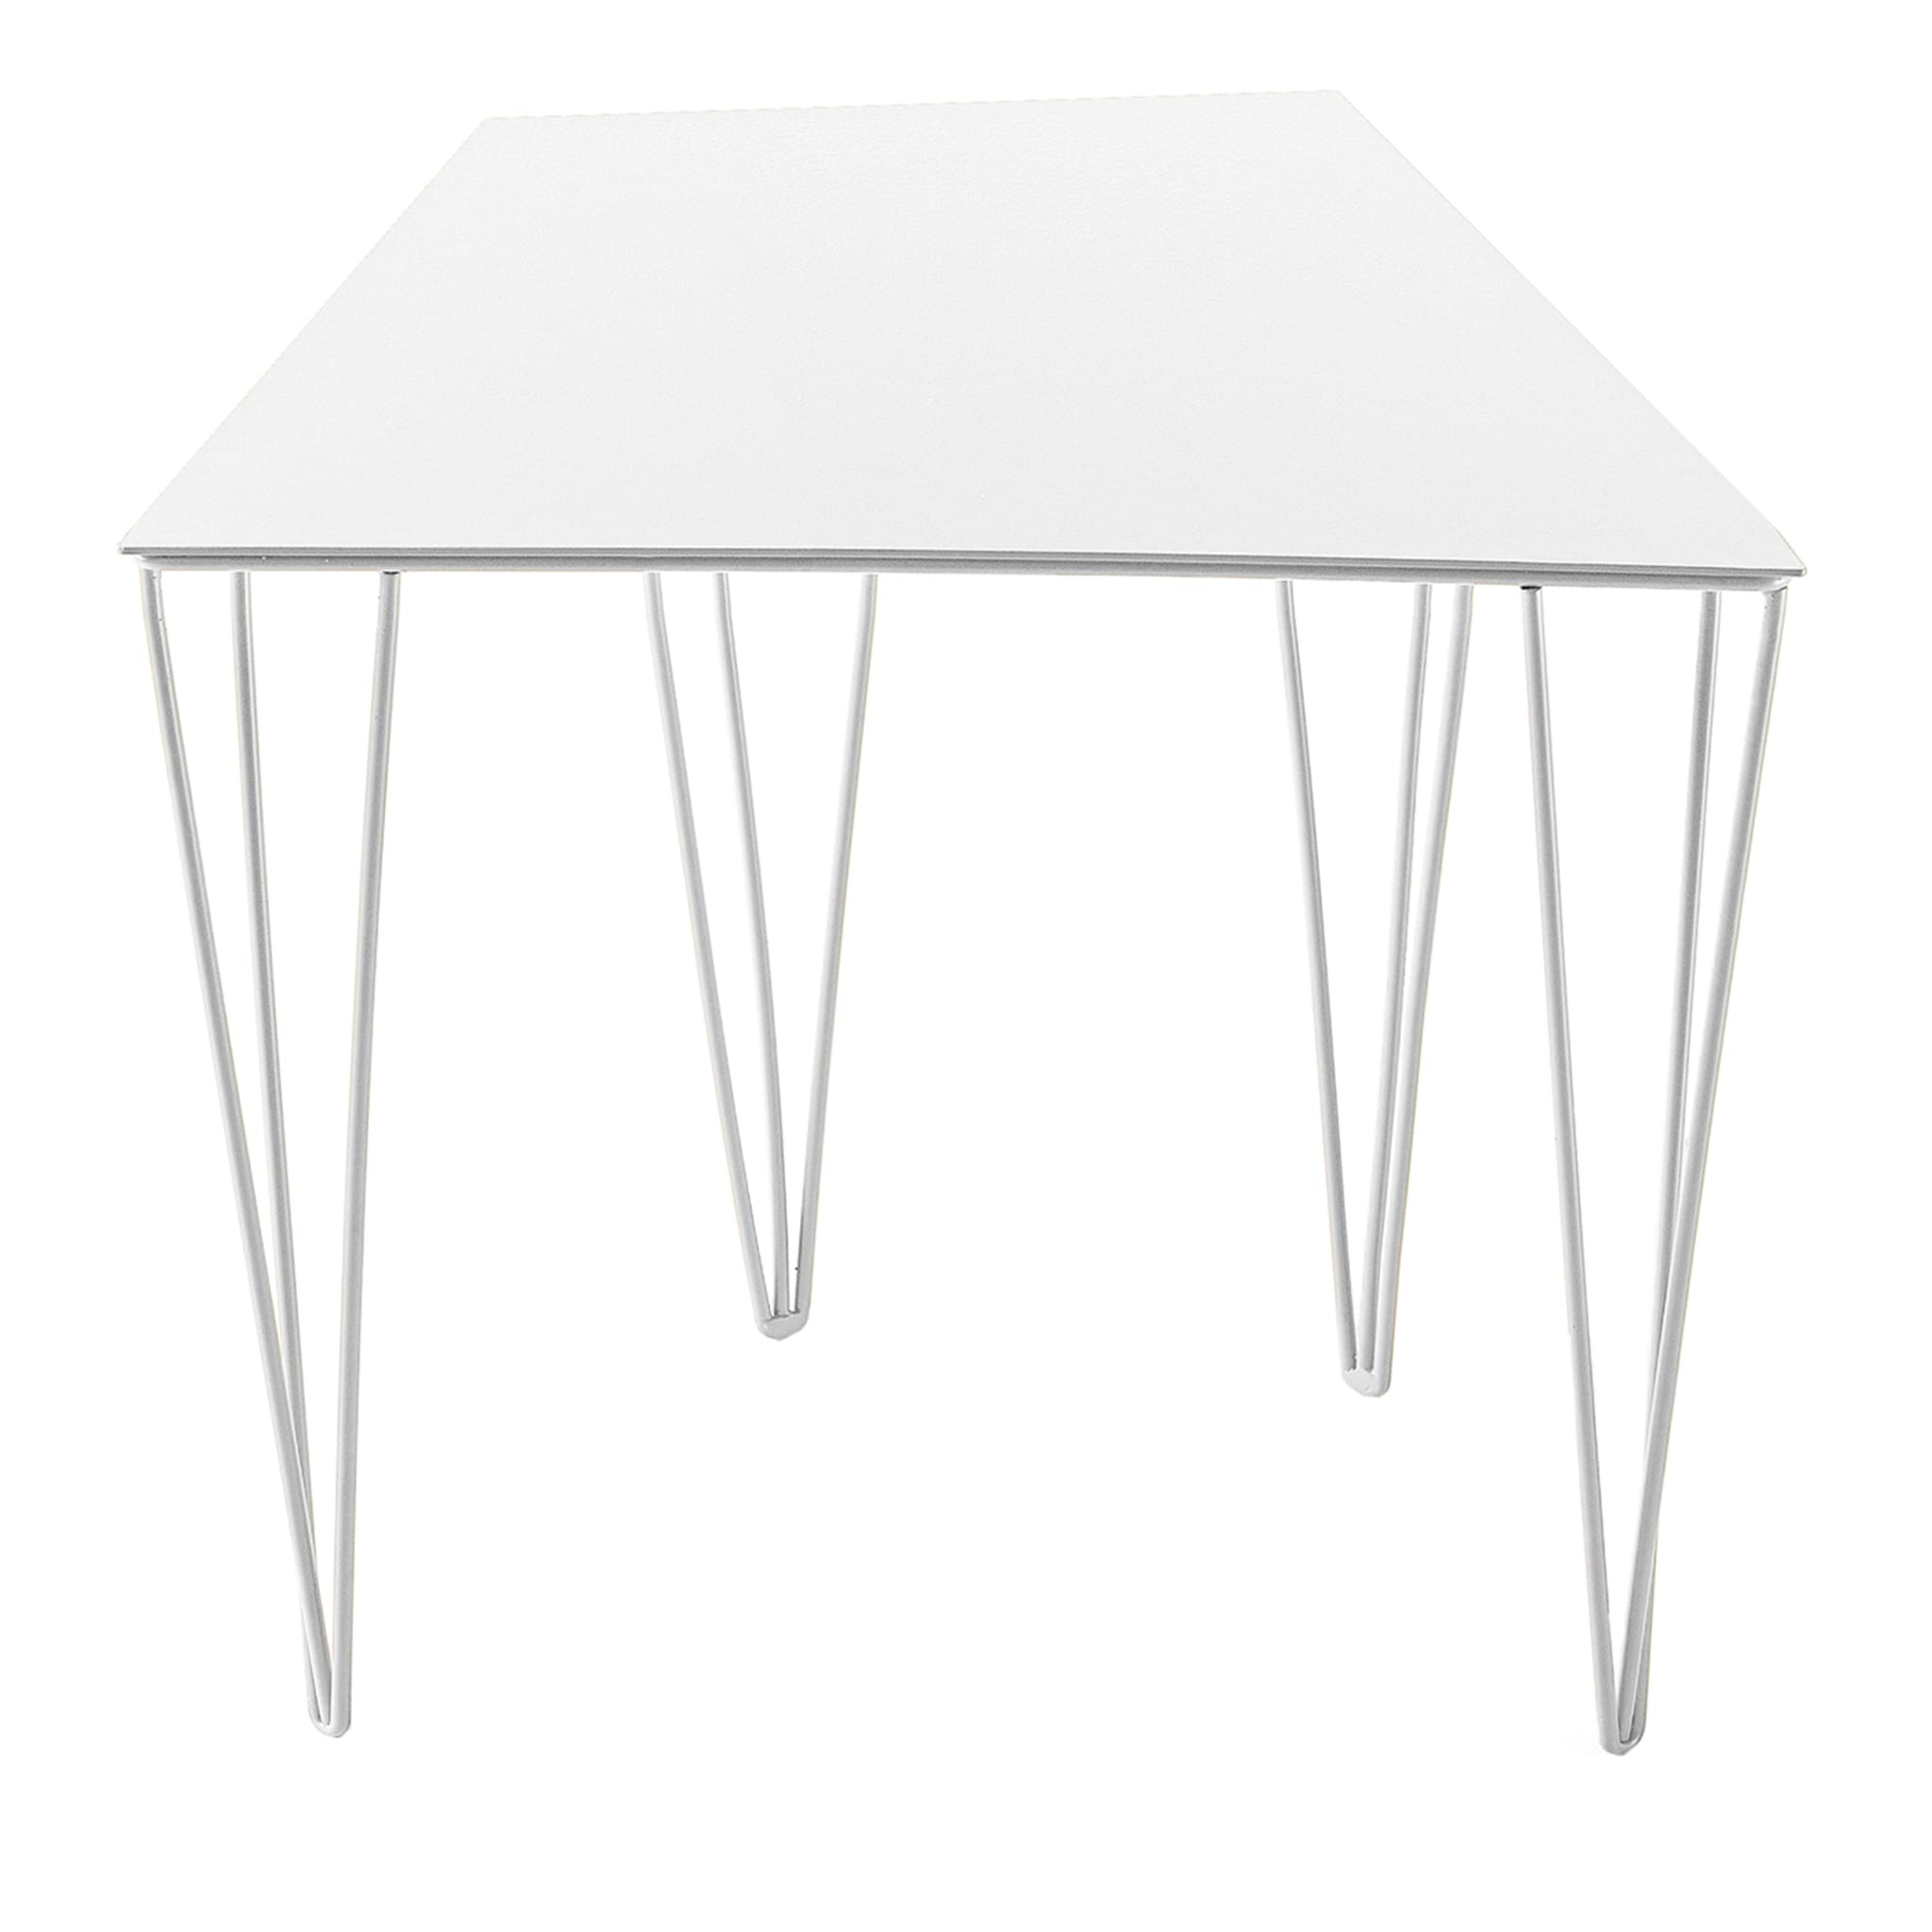 Chele White Coffee Table #1 - Main view